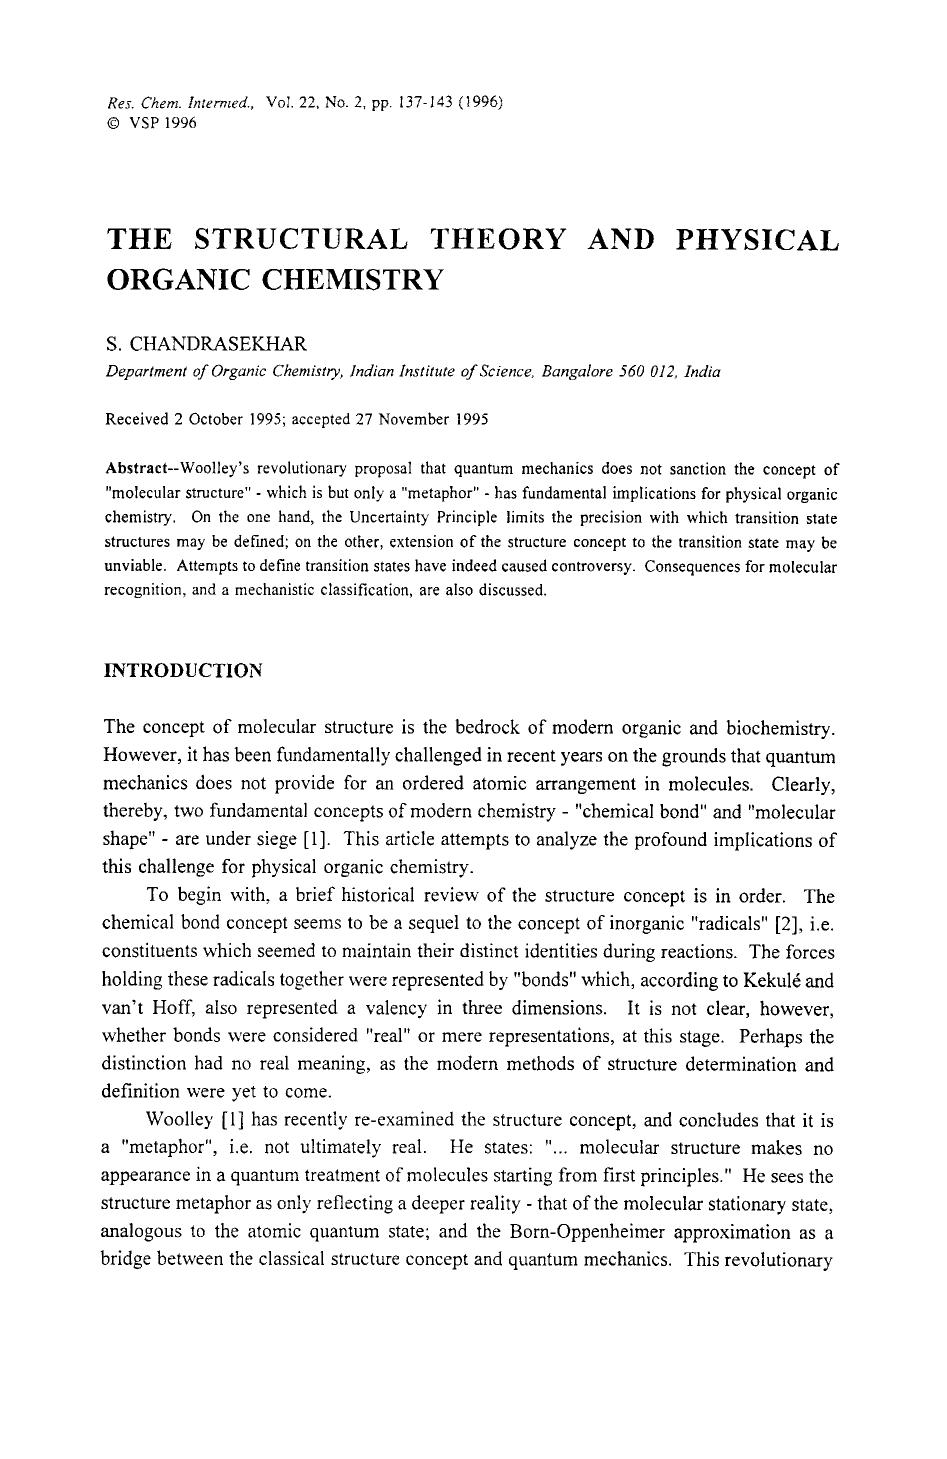 The structural theory and physical organic chemistry by Unknown